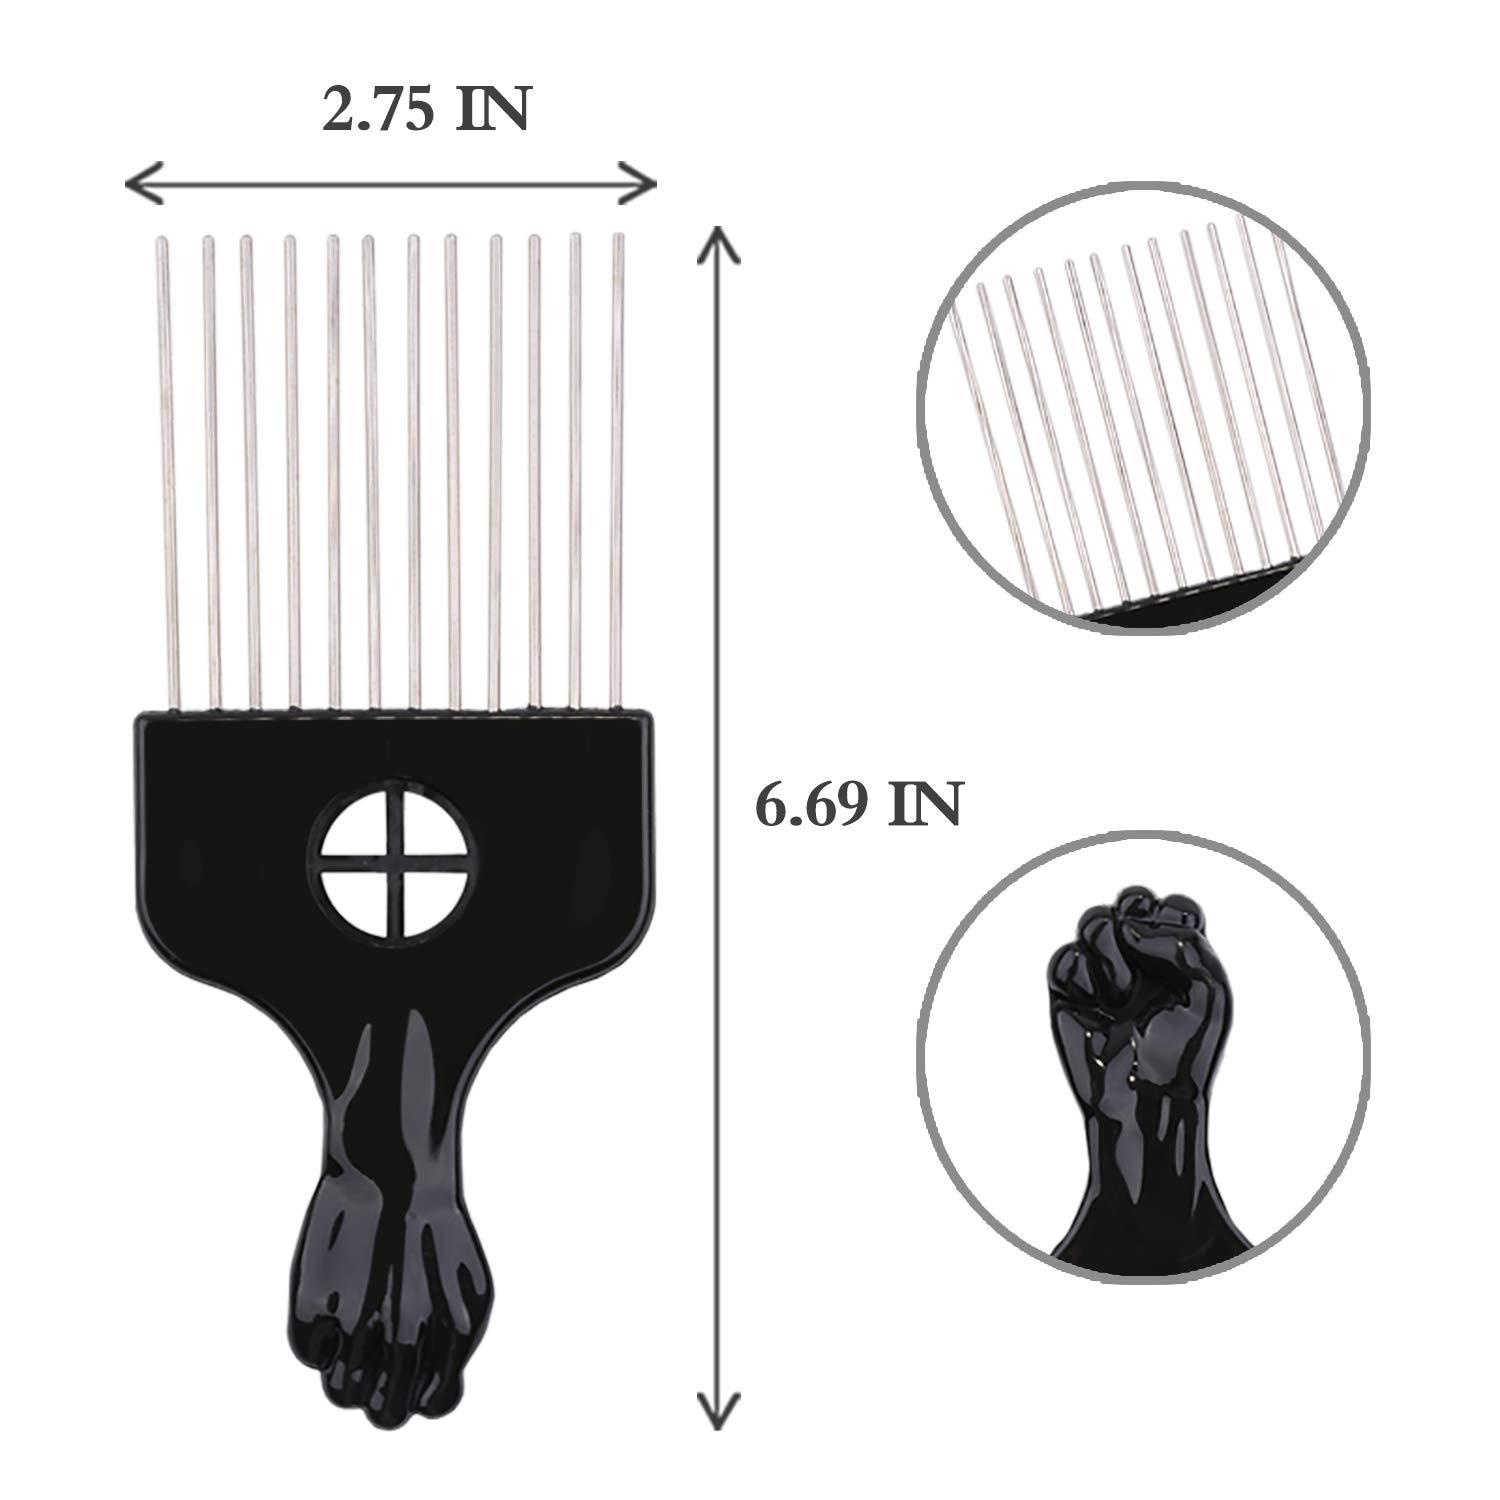 Afro Pick, Hair Pick, Metal Pick Comb, Detangle Wig Braid Hair Styling  Comb, Hair Comb Pick (1 PACK)